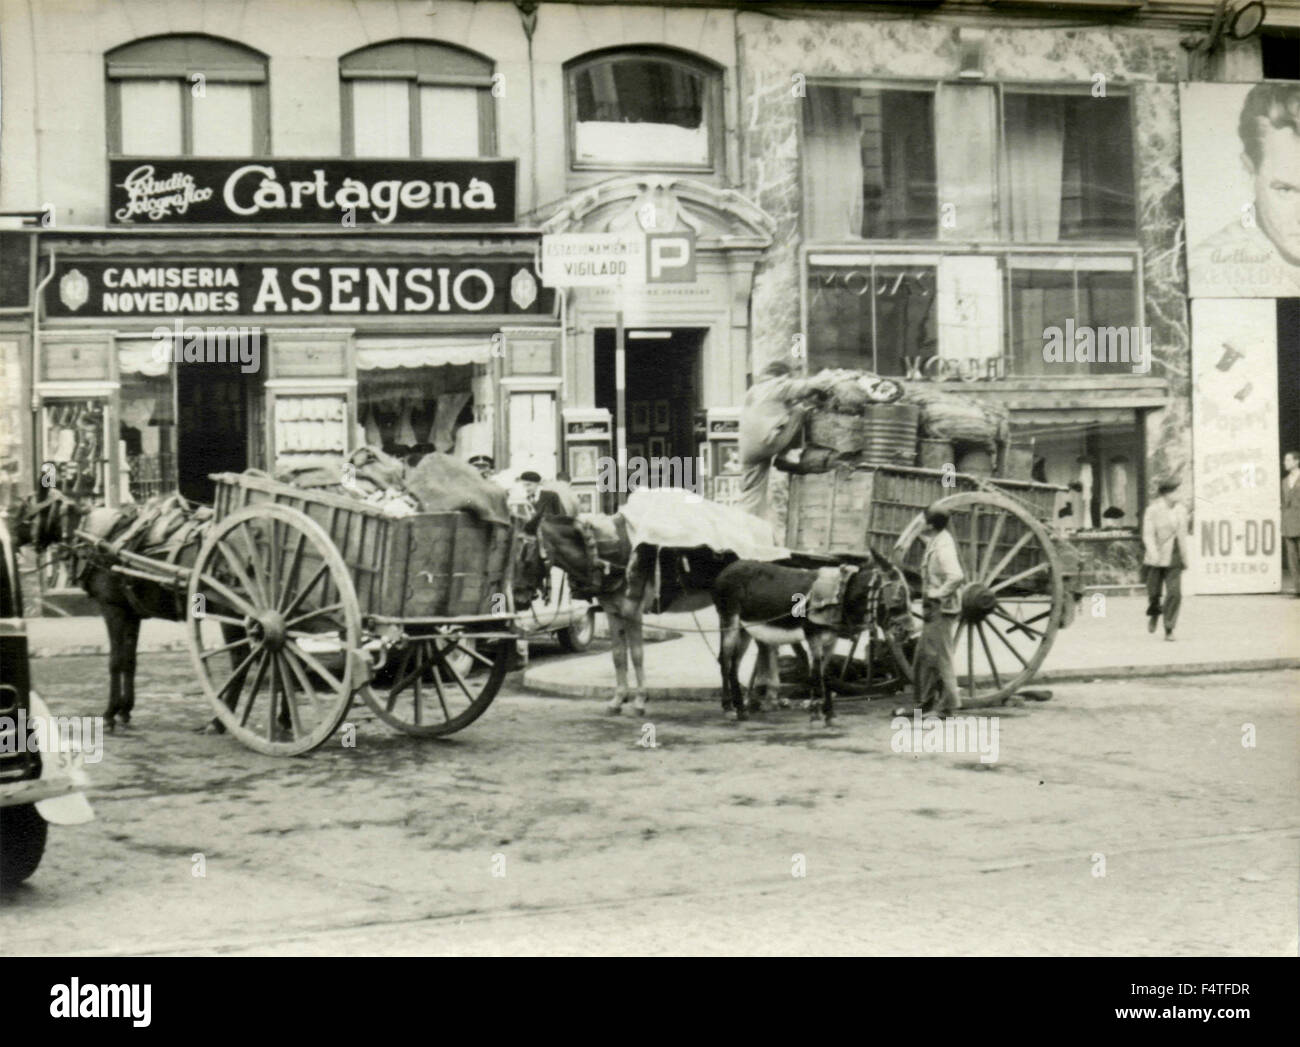 Two horse-drawn wagons carrying goods in Cartagena, Spain Stock Photo -  Alamy